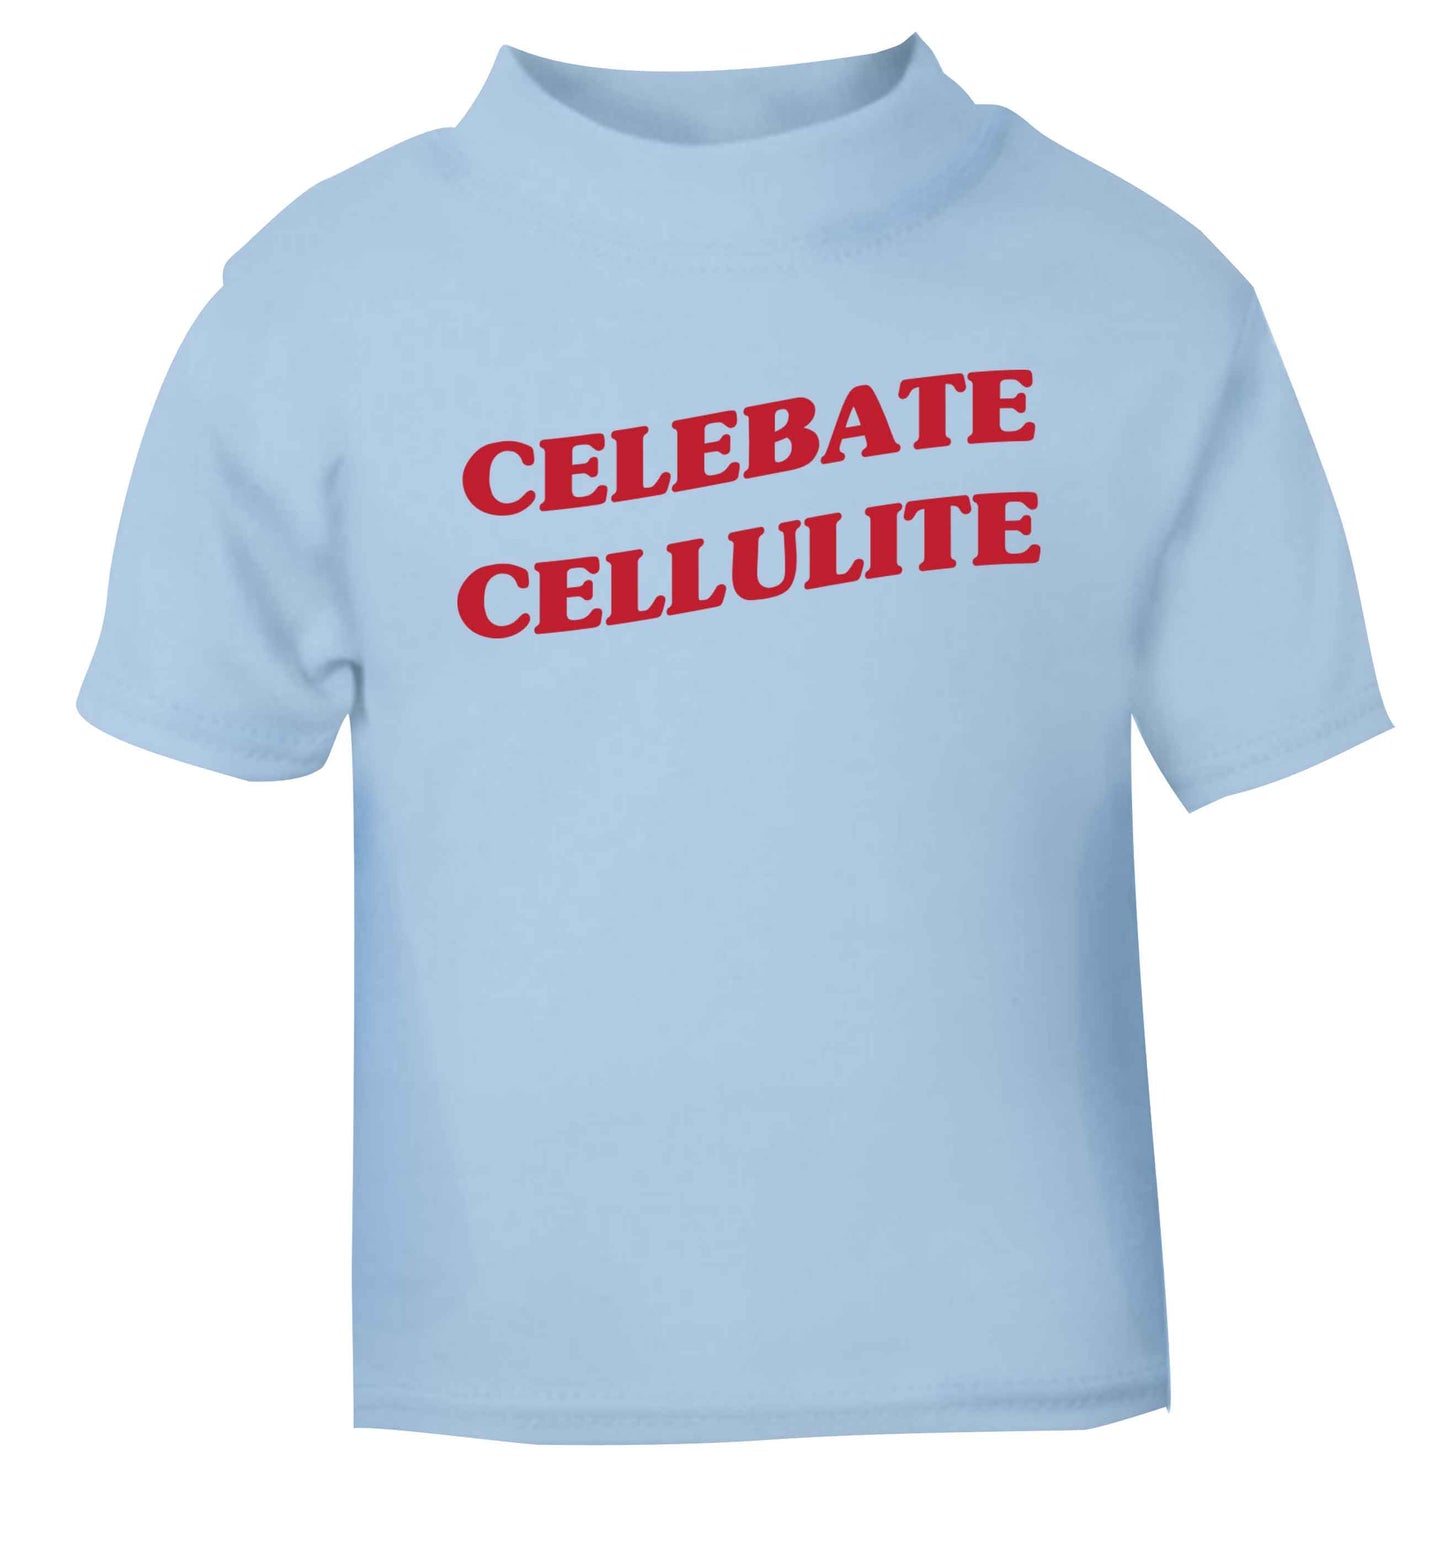 Celebrate cellulite light blue baby toddler Tshirt 2 Years